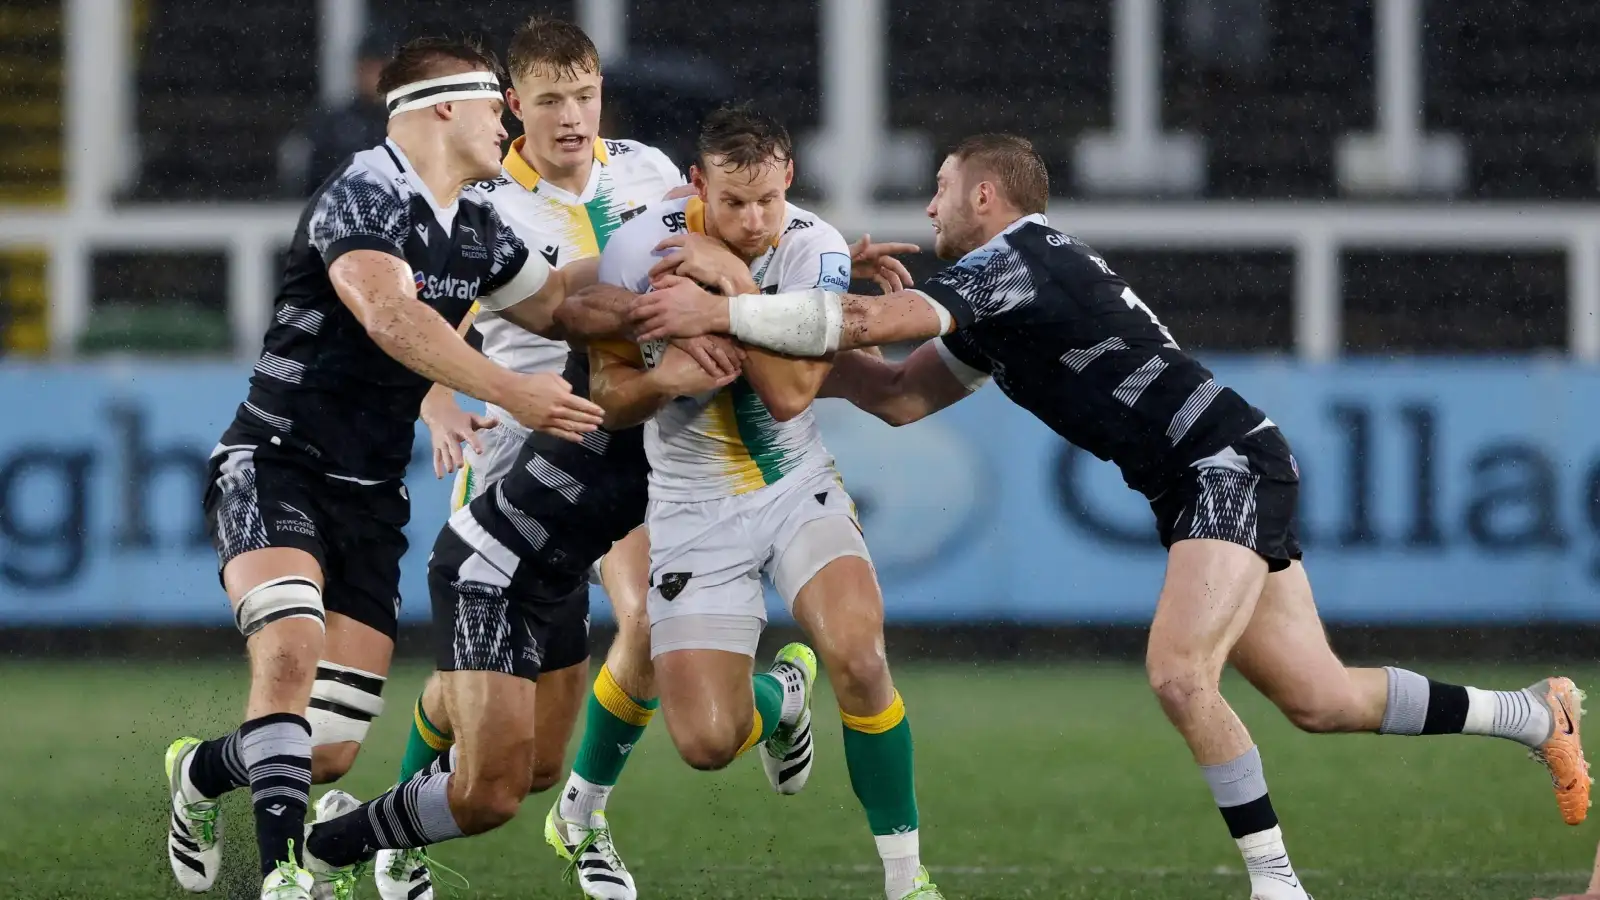 Northampton Saints face up with Newcastle Falcons in the Premiership.